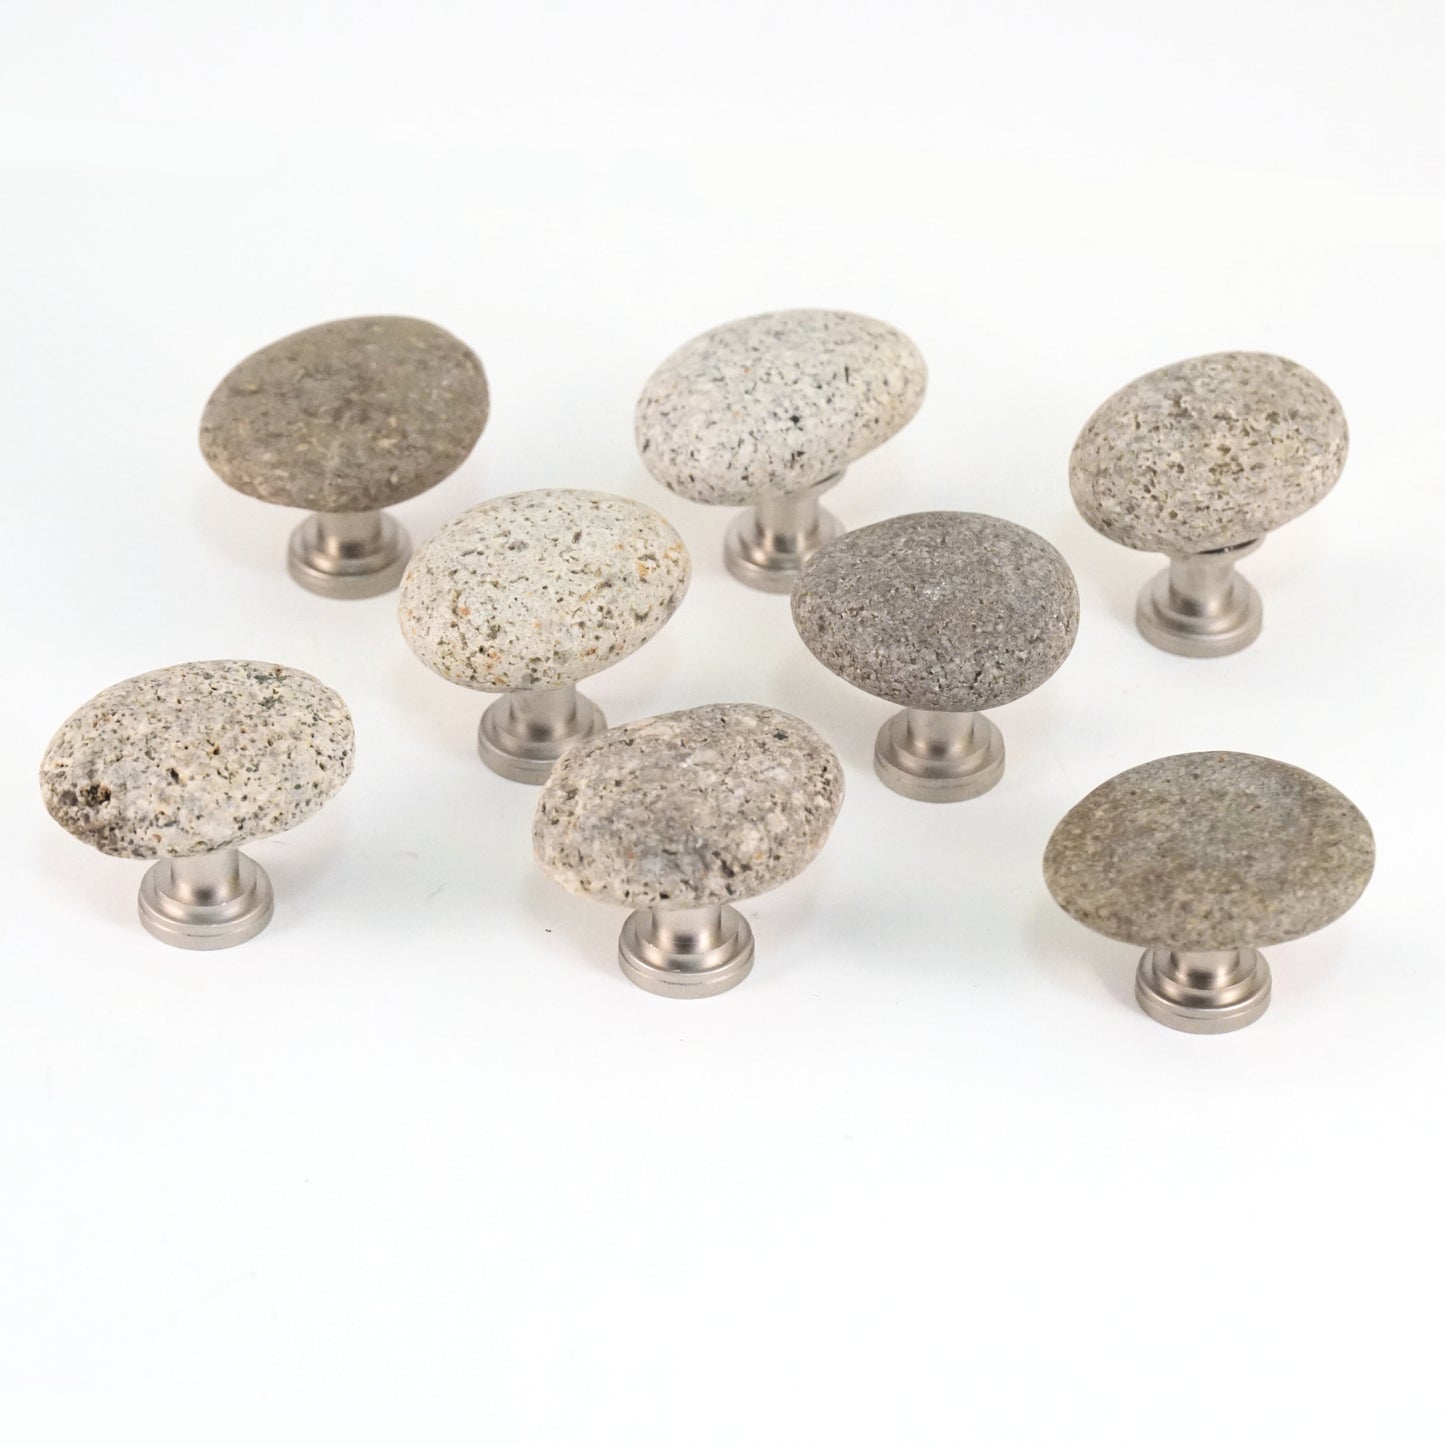 Beach Pebble Stone Rock Cabinet Knobs - Set of 8 Mixed Granite - Ready to Ship